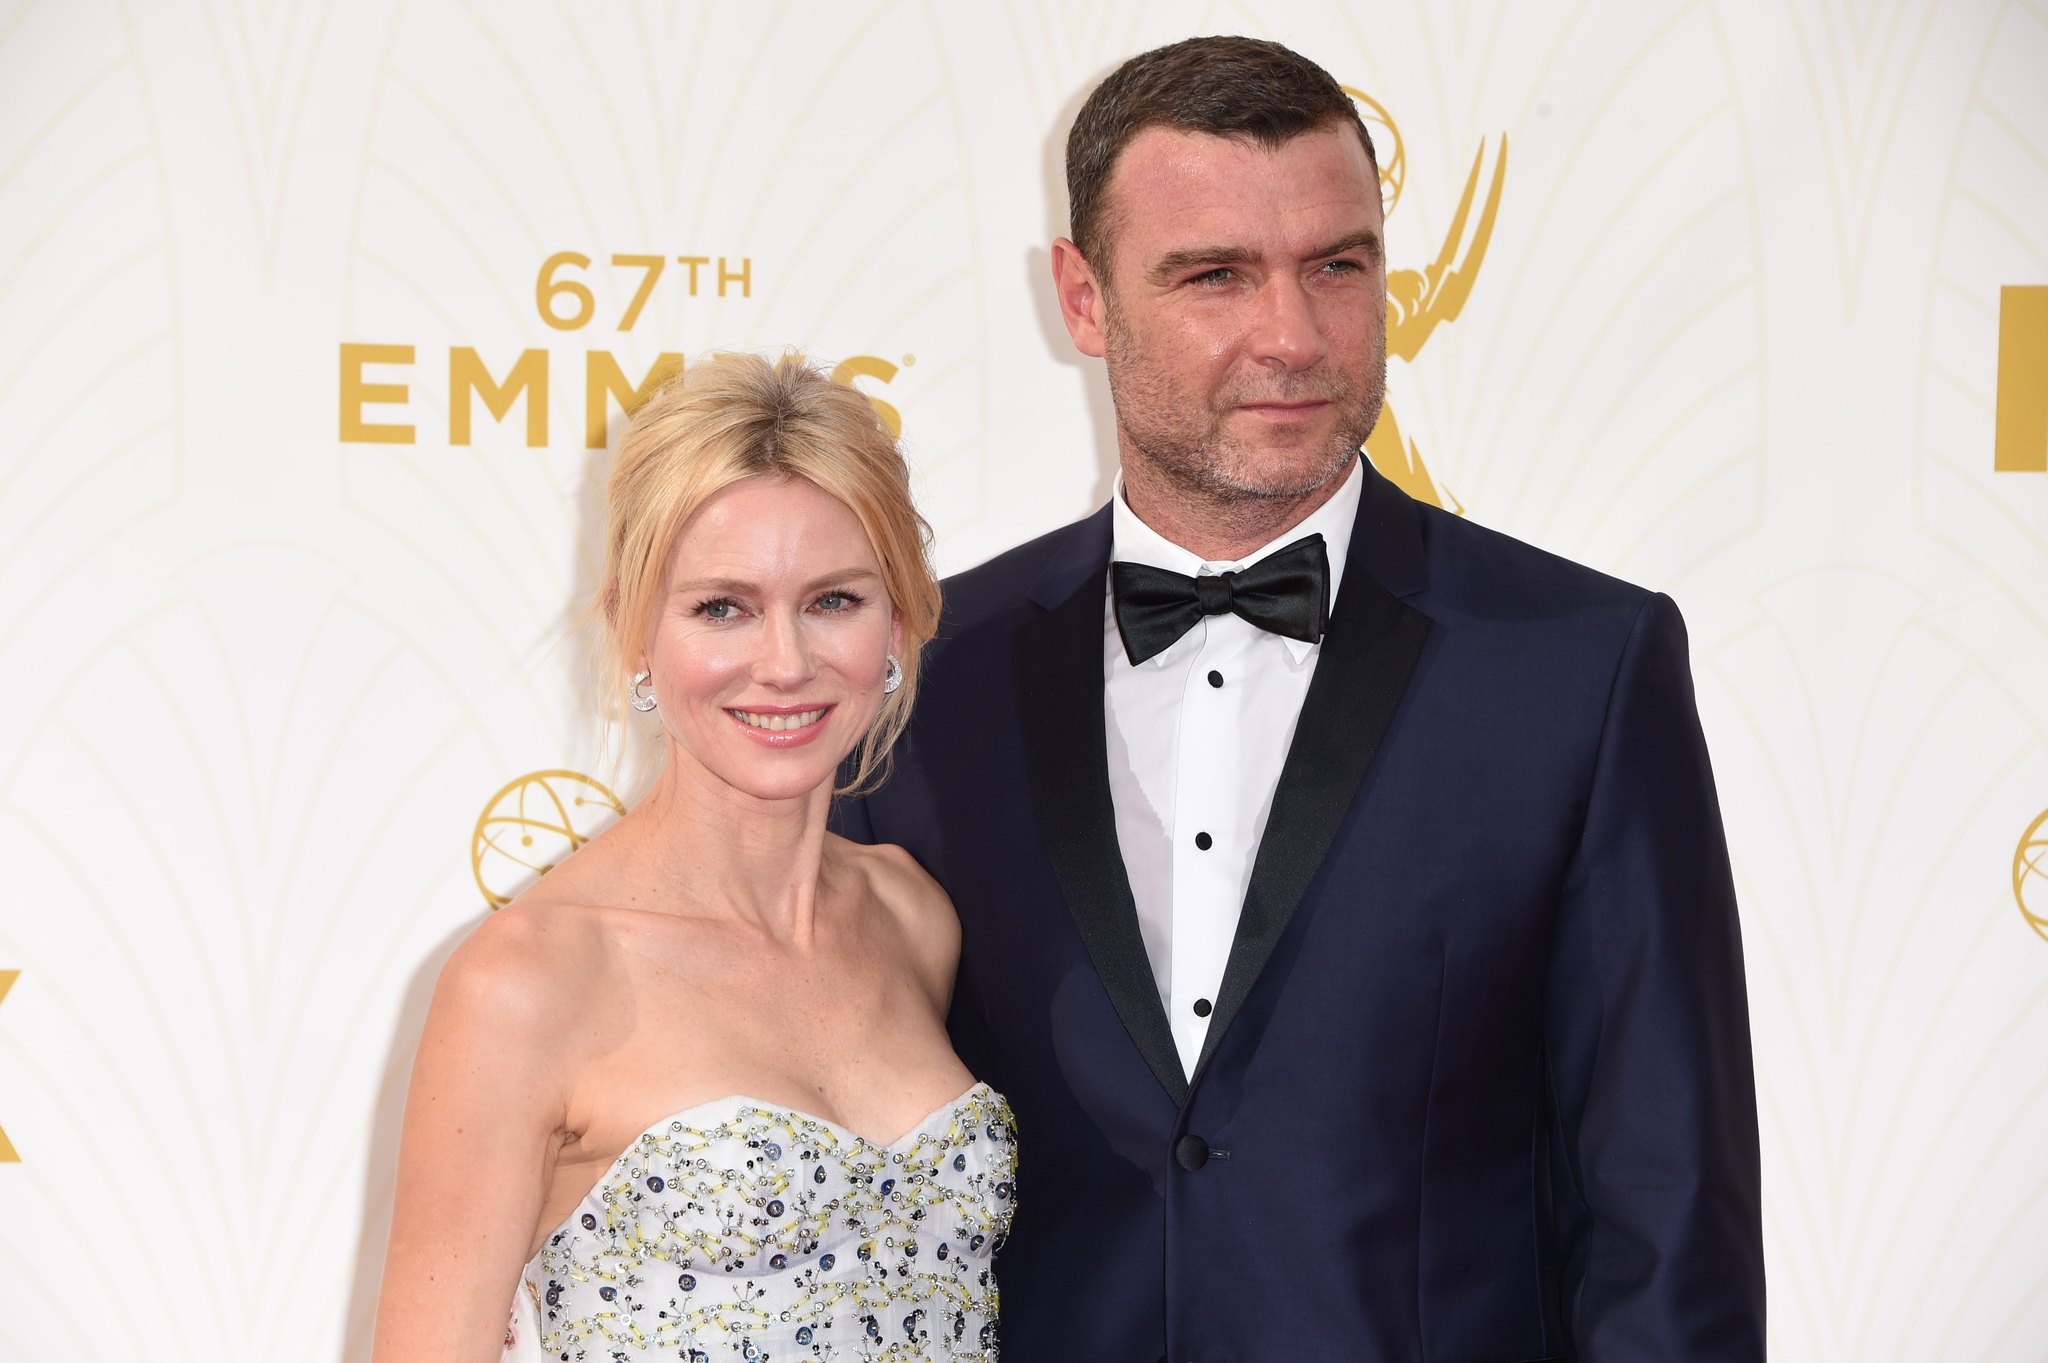 Liev Schreiber and Naomi Watts at event of The 67th Primetime Emmy Awards (2015)